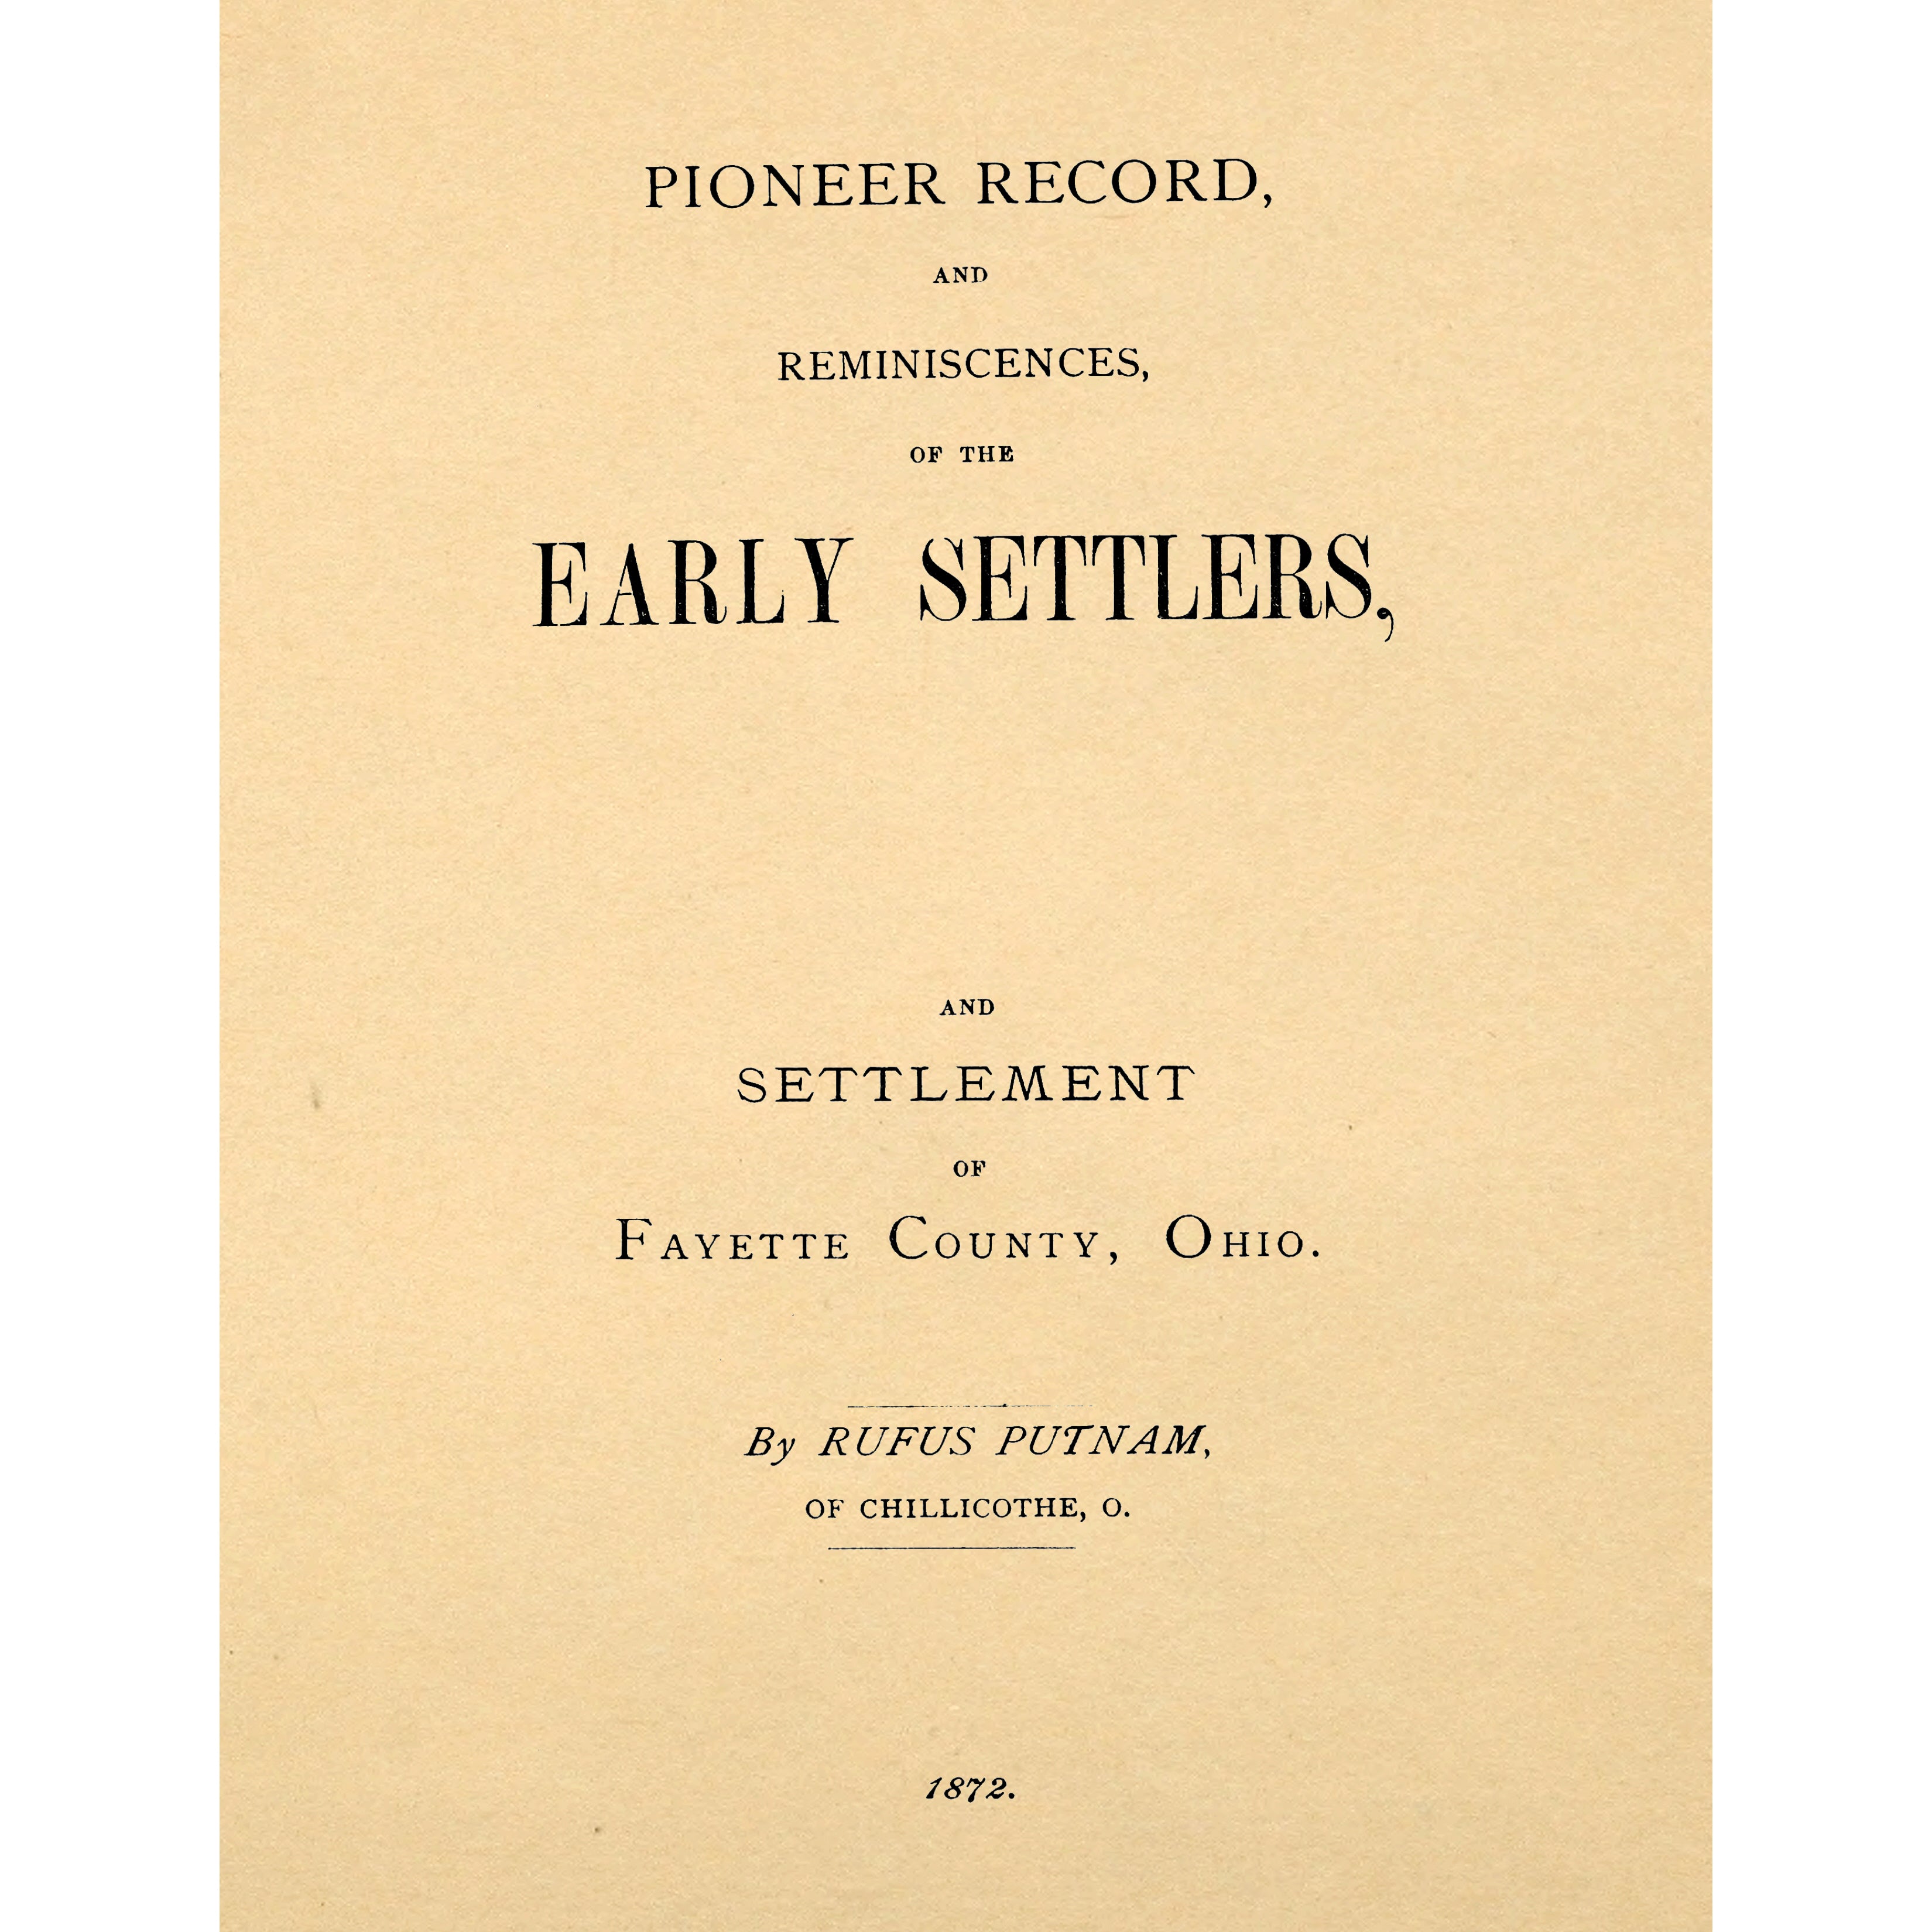 Pioneer record and reminiscences of the early settlers and settlement of Fayette County, Ohio